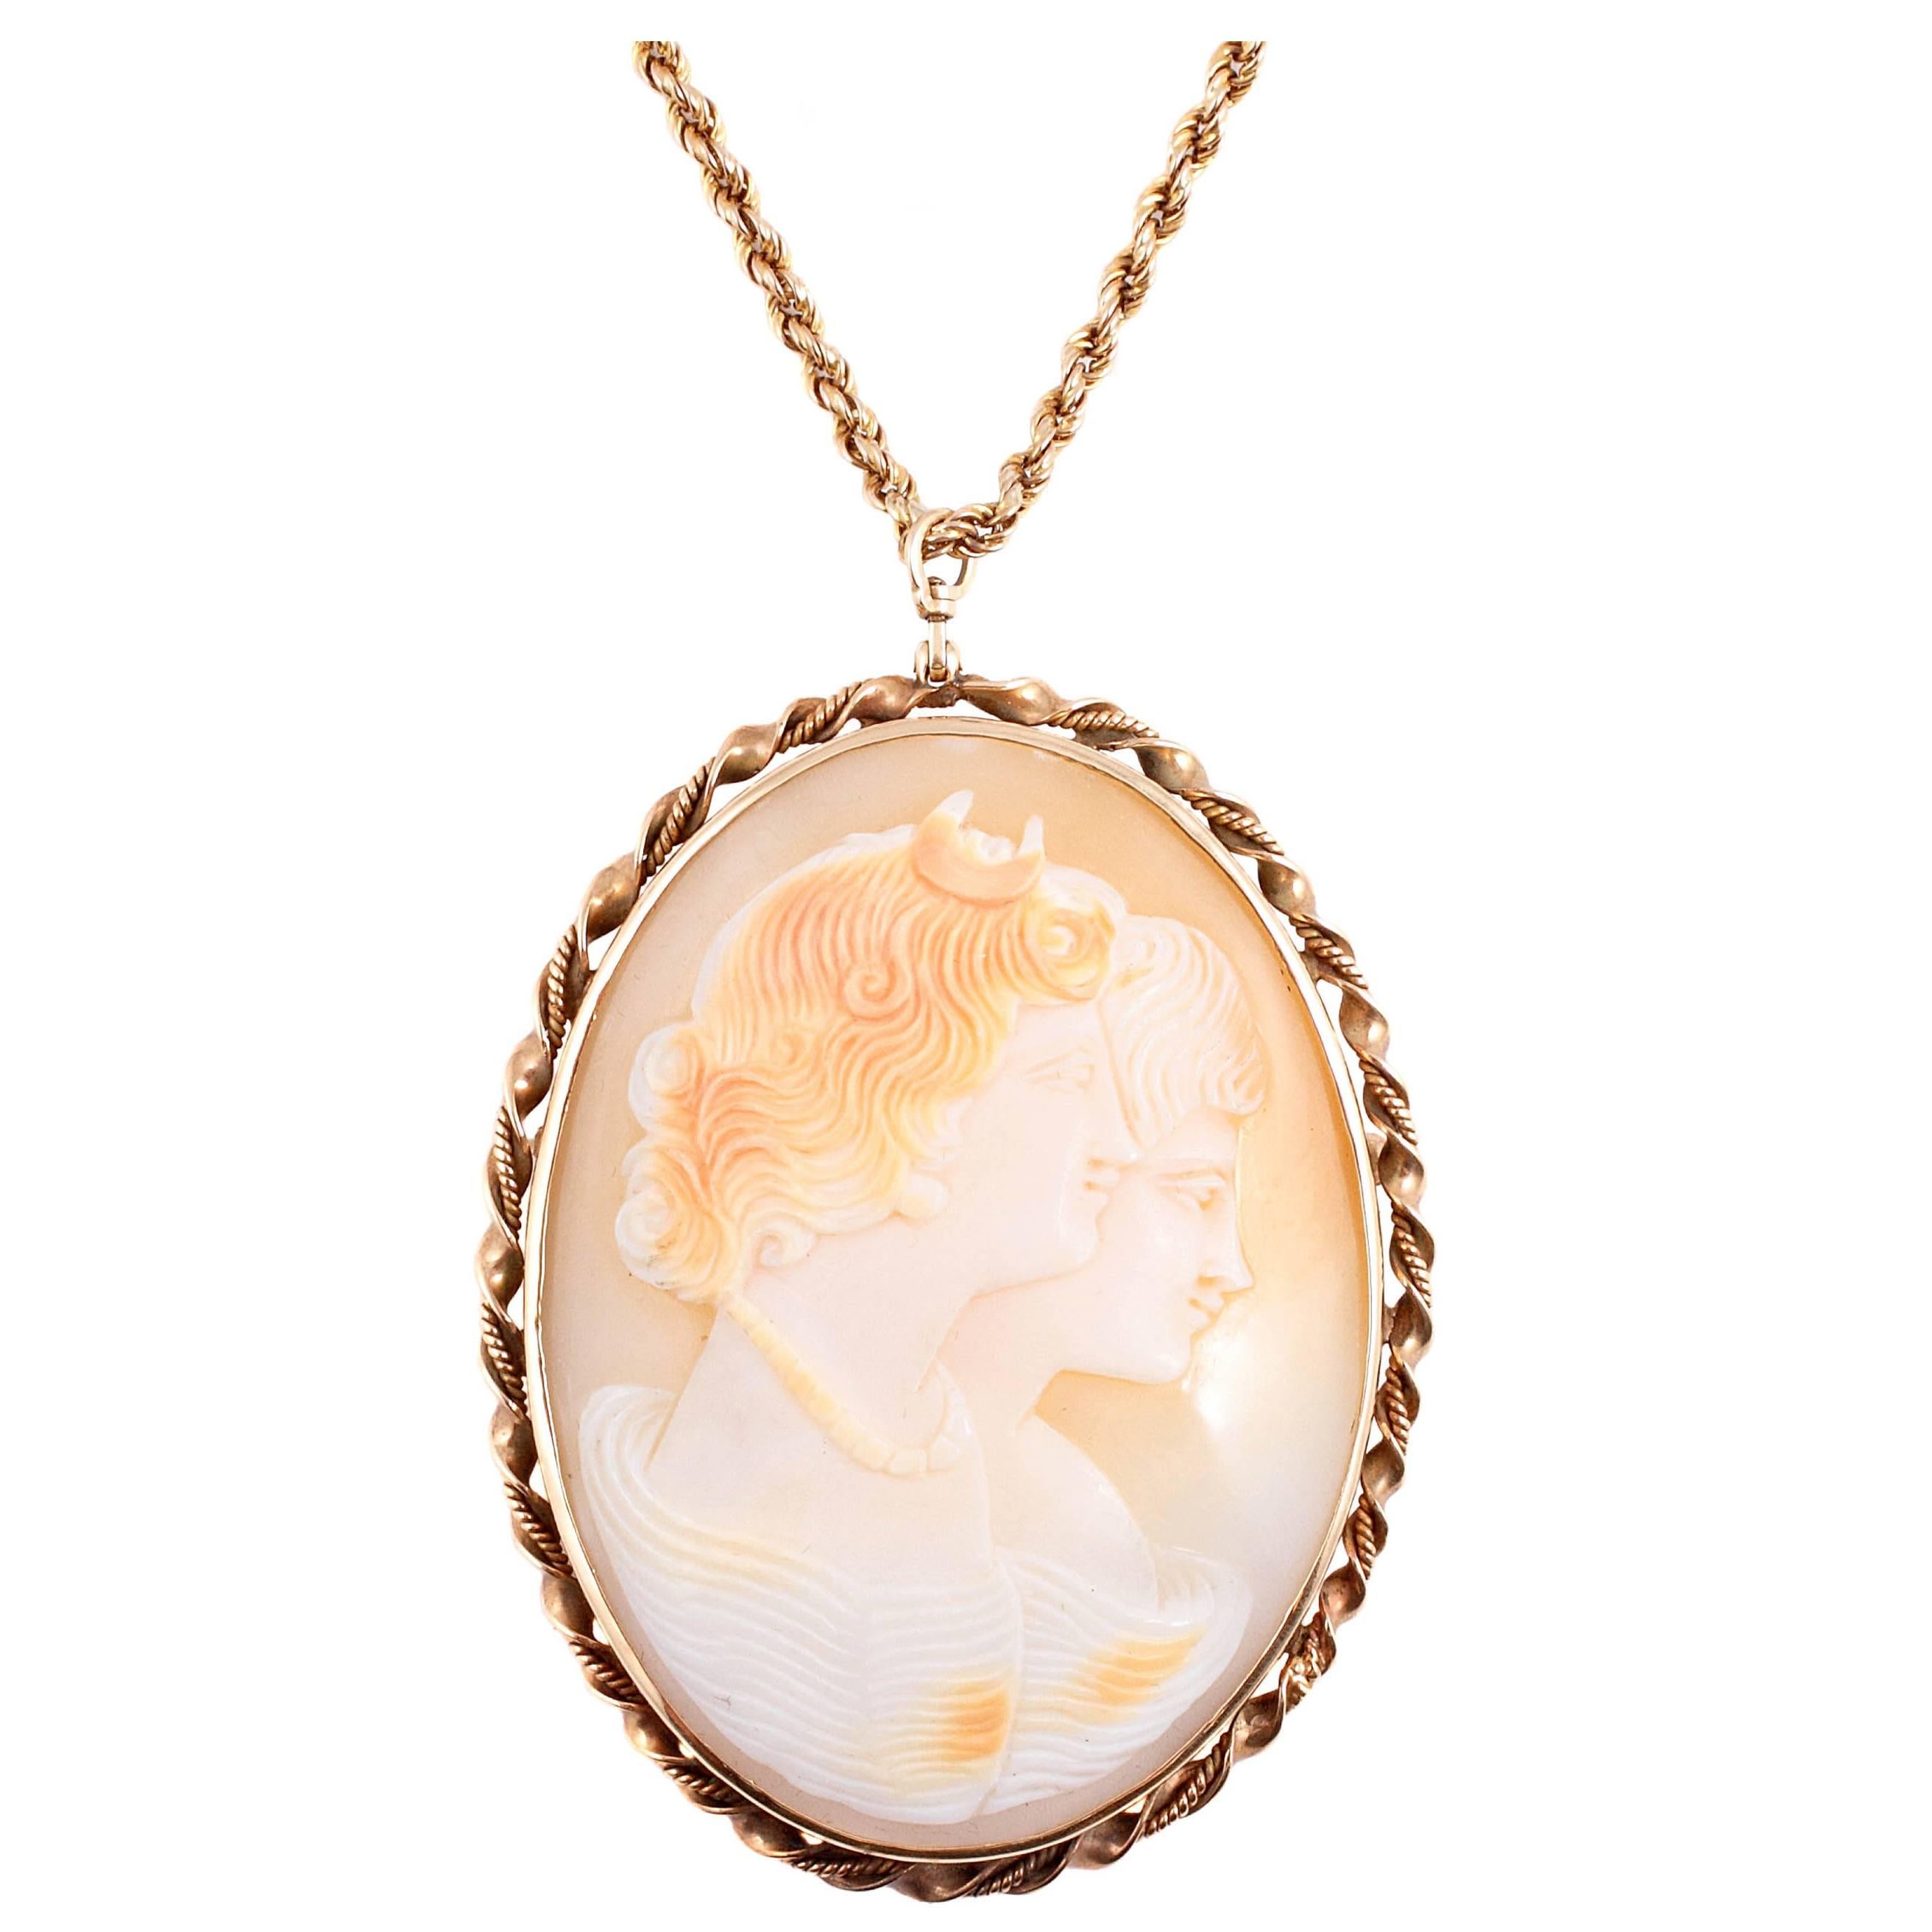 Gold Shell Cameo Pin Pendant on Chain